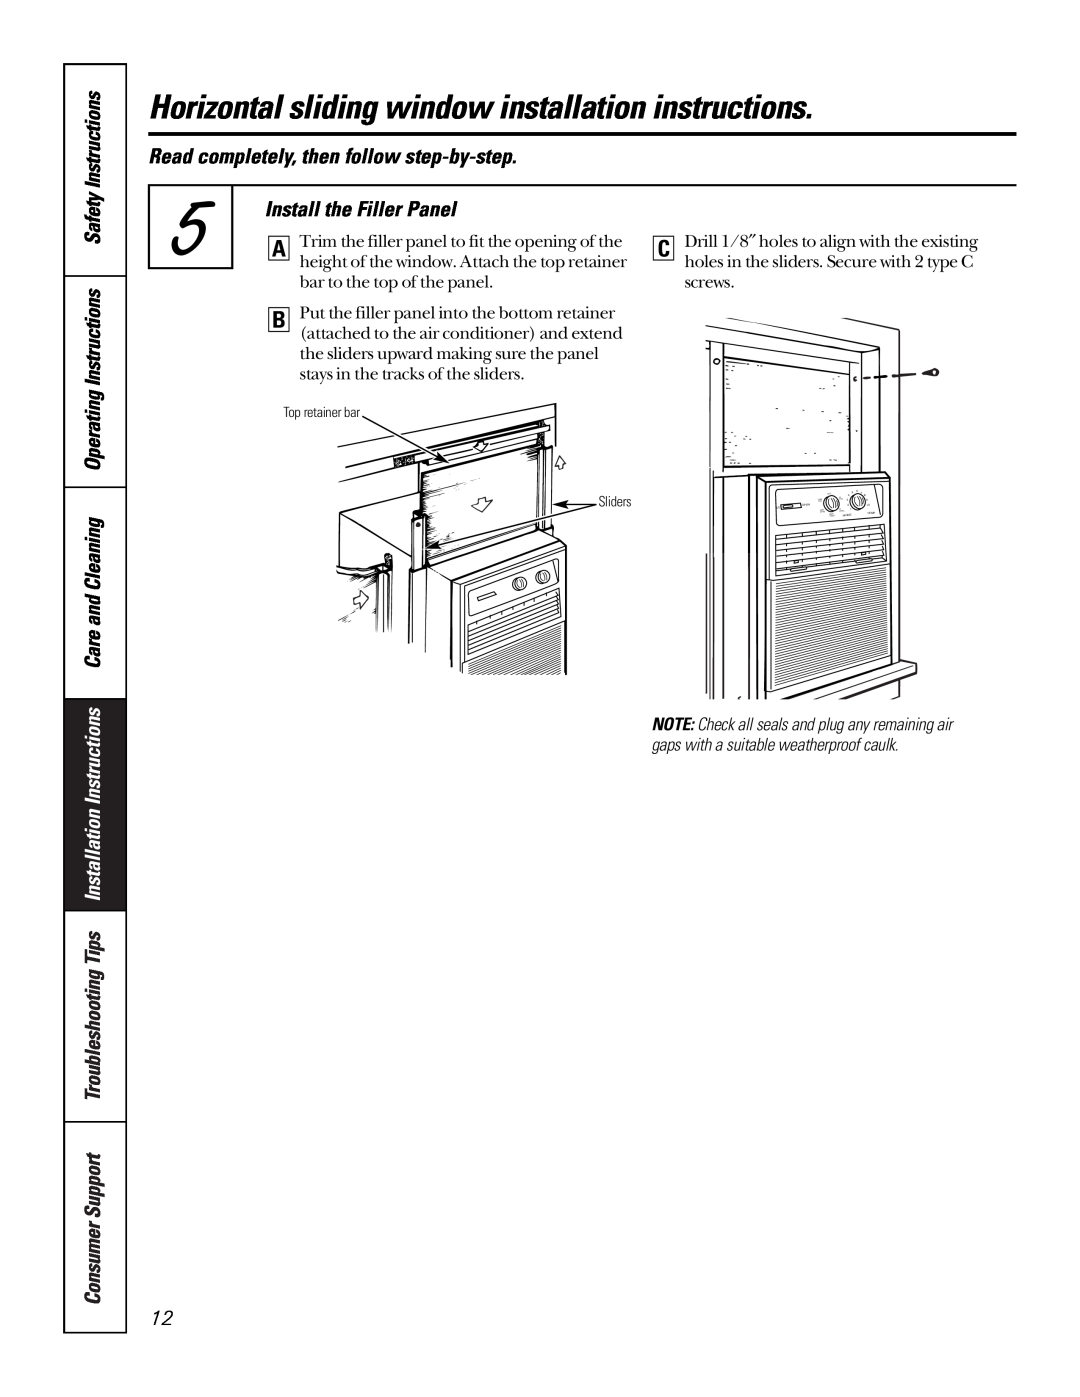 GE AVX10, AVX07, AVX08 Instructions Safety, Install the Filler Panel, Read completely, then follow step-by-step 